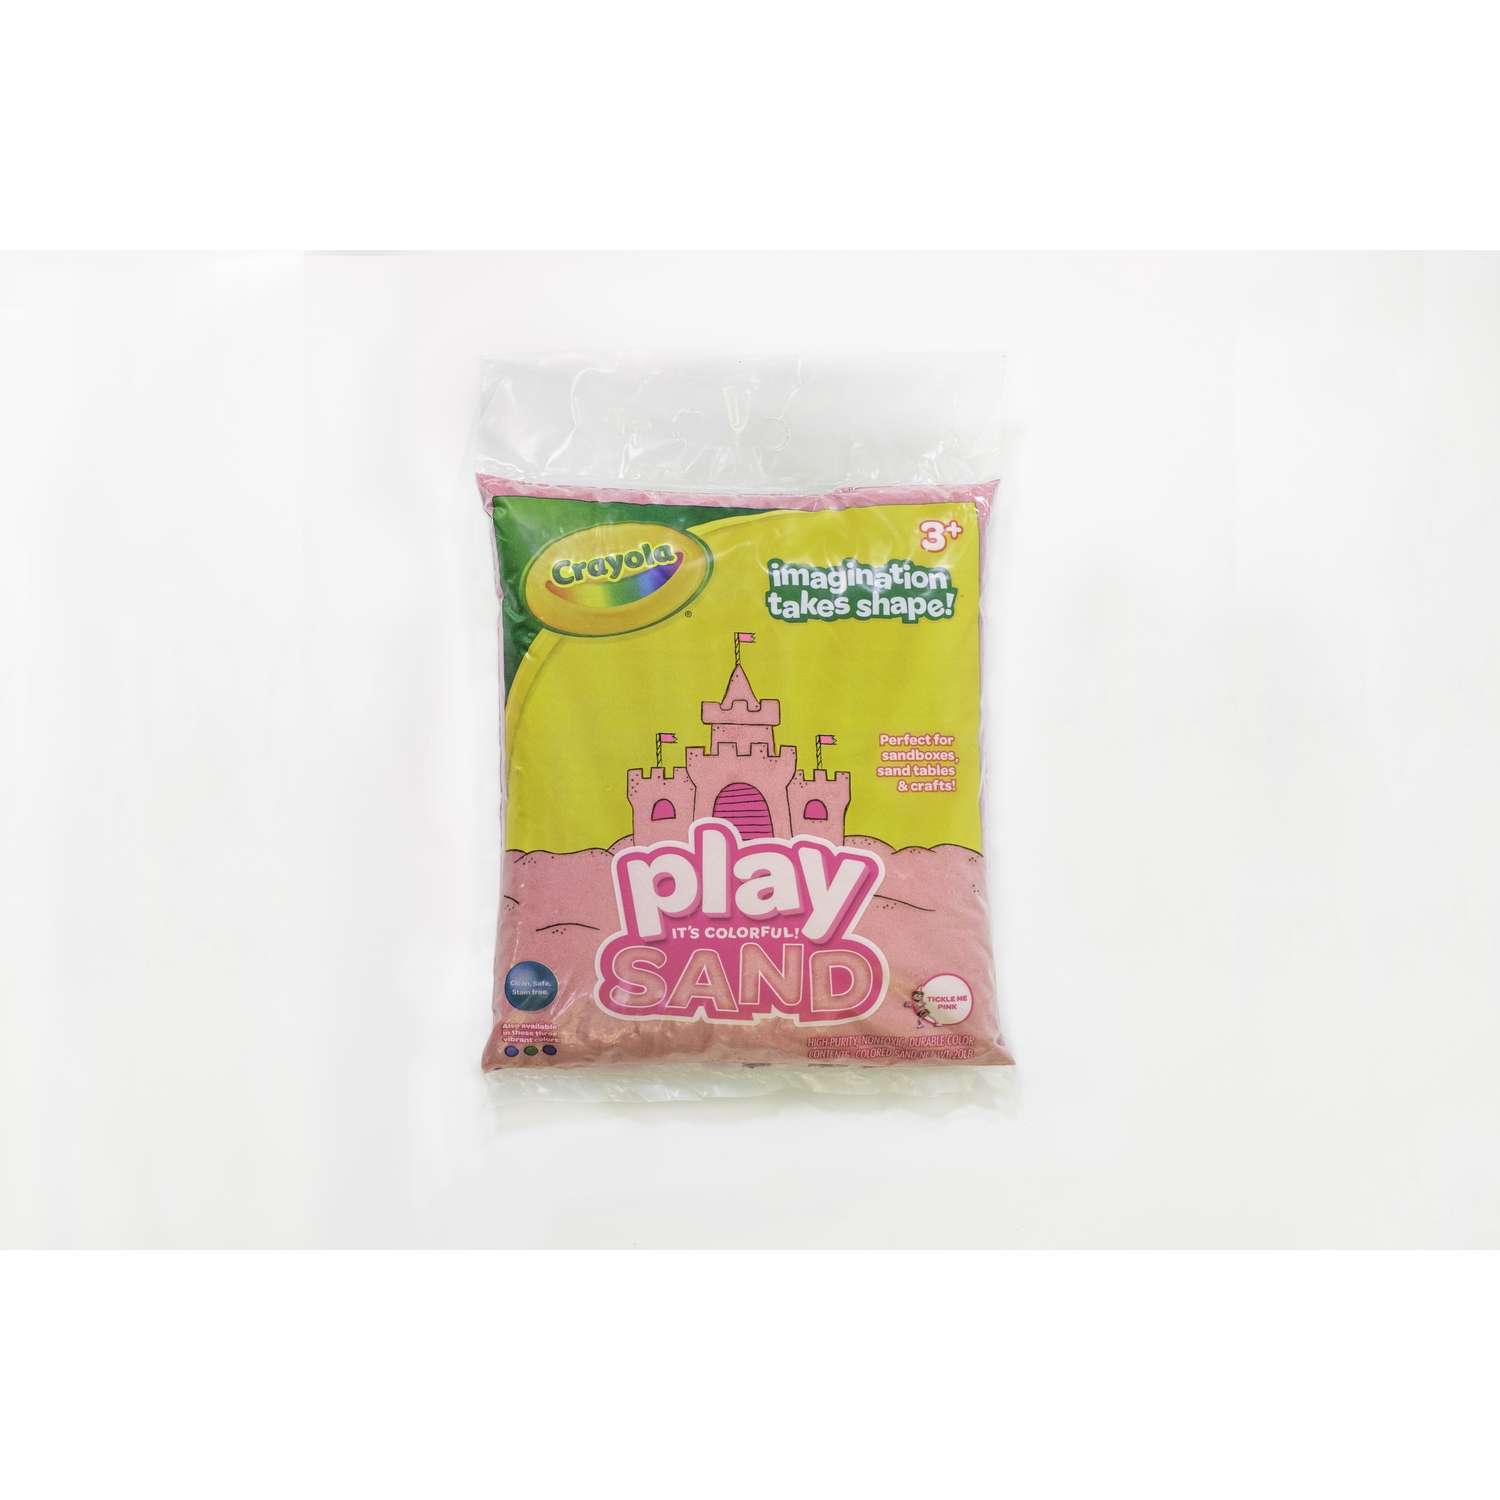 Crayola Play Sand Pink Dried Play Sand 20 lb Ace Hardware